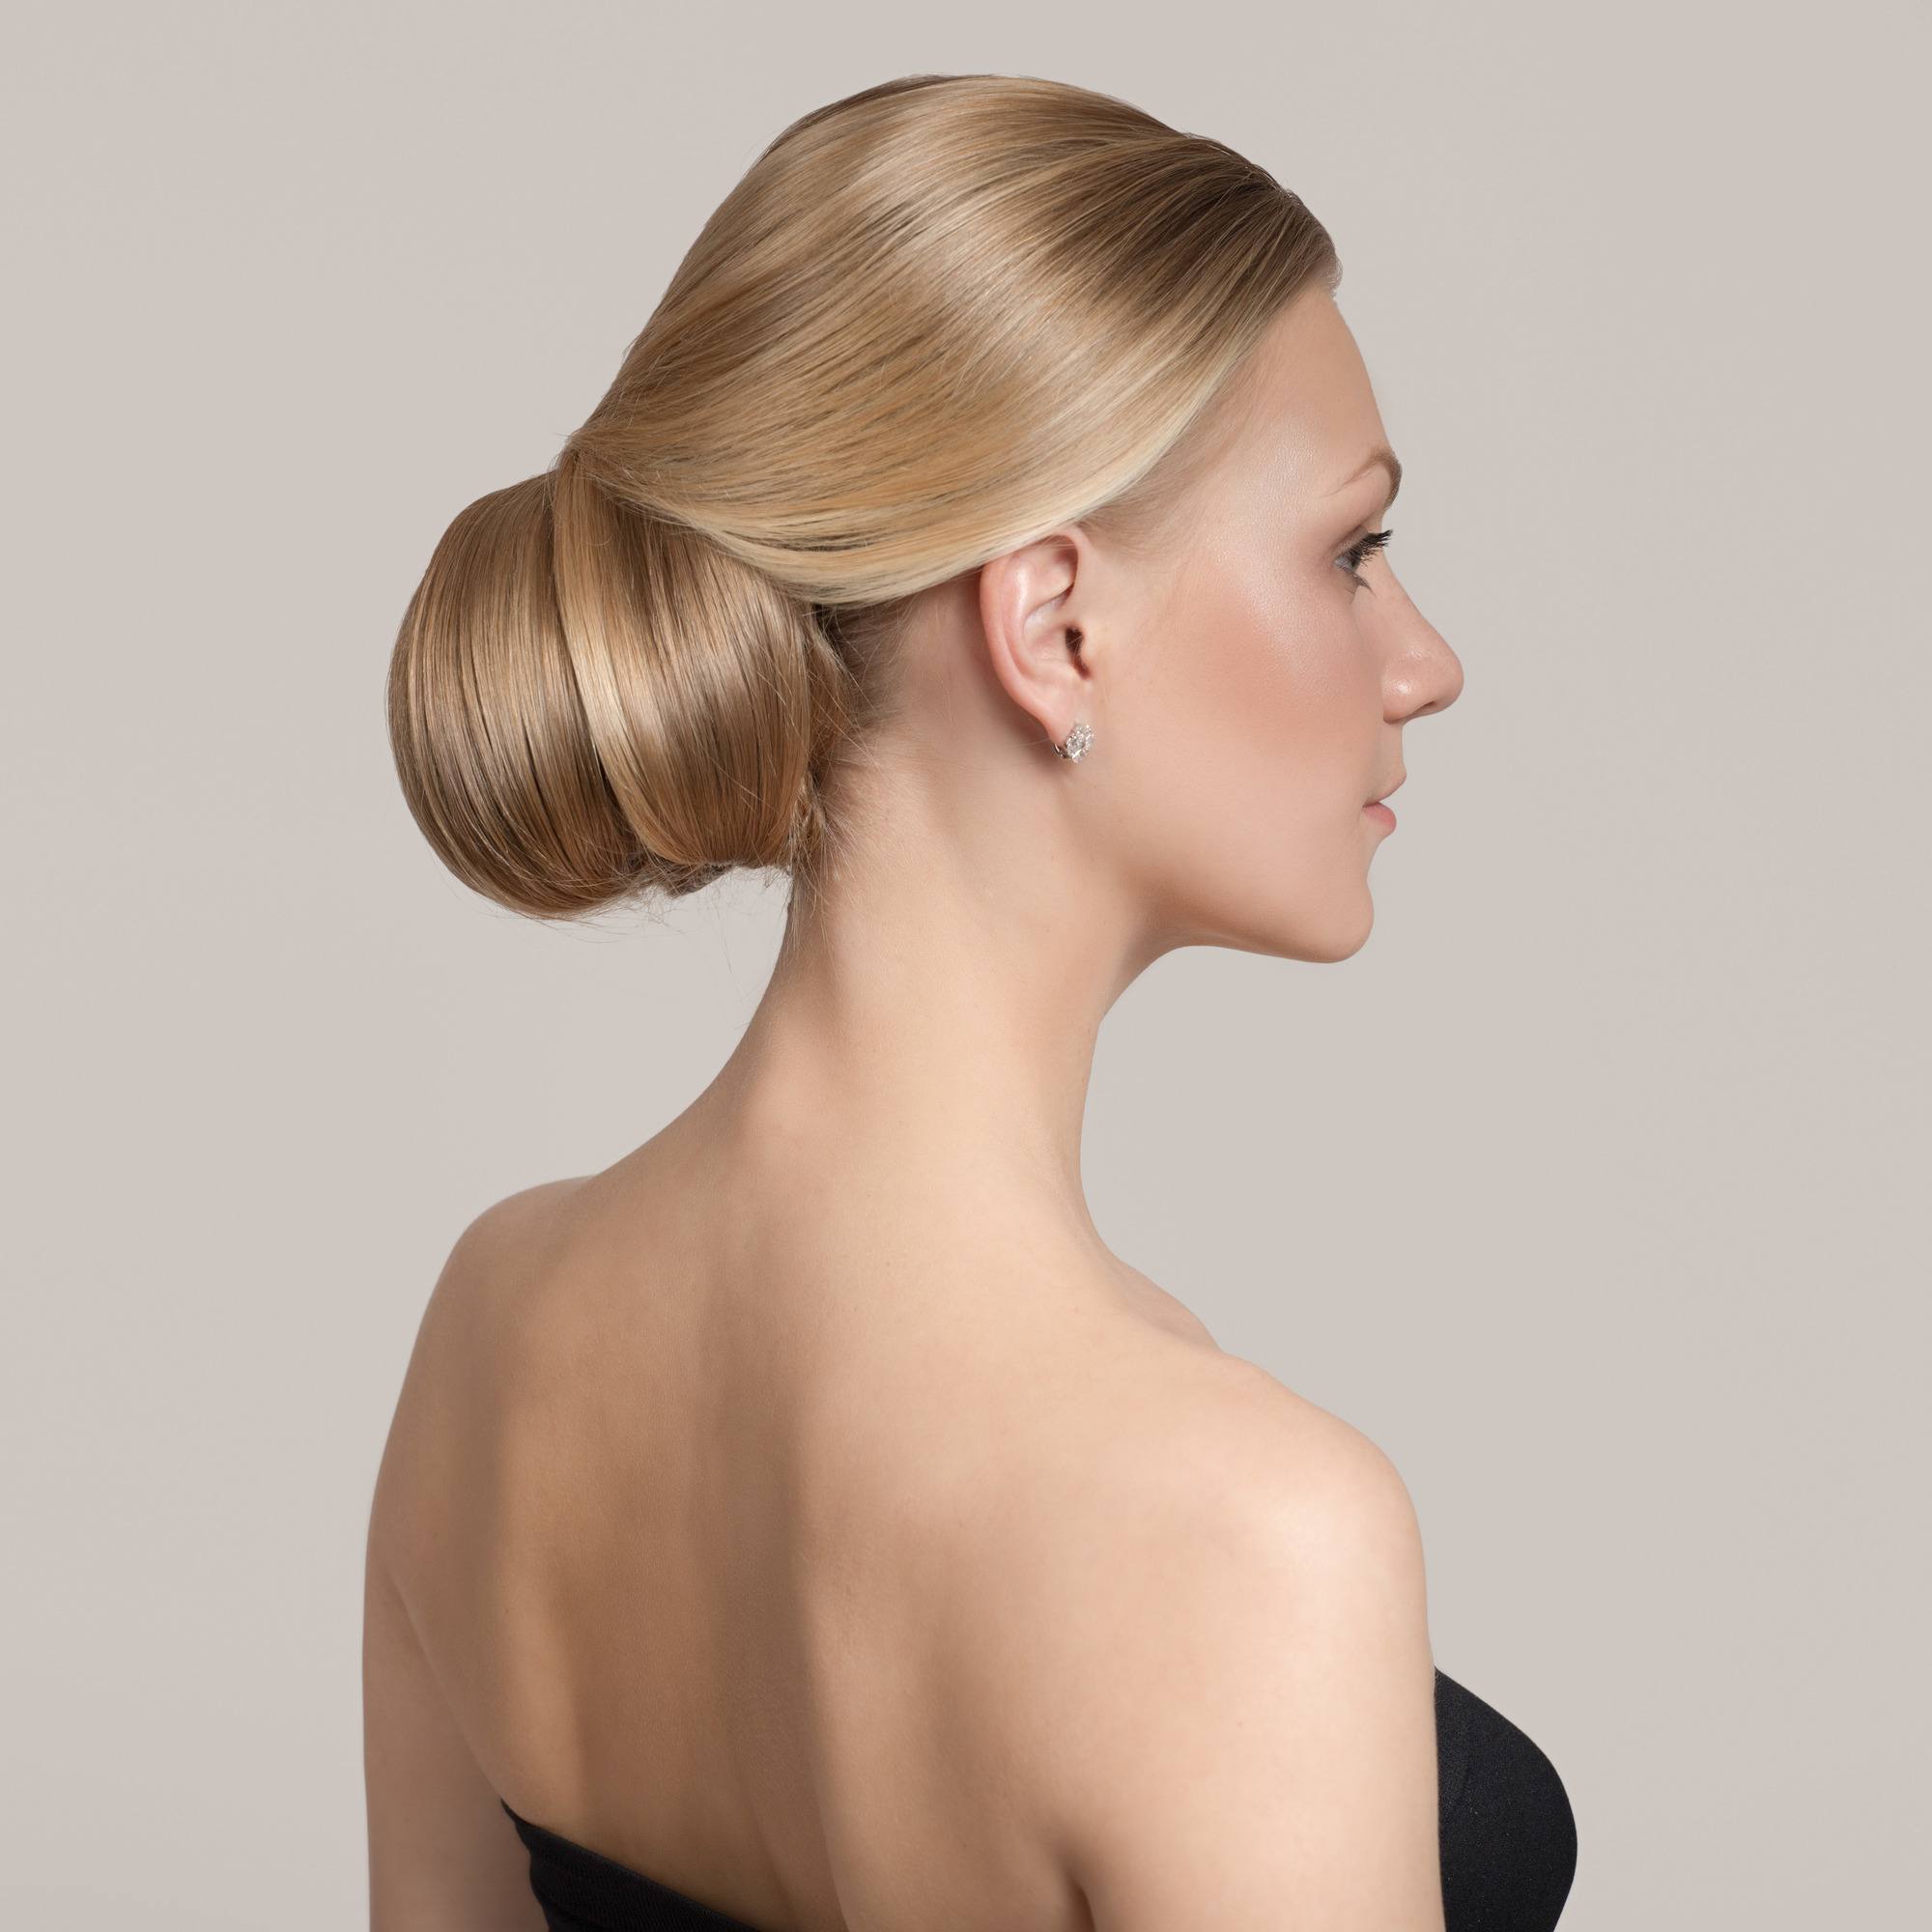 Woman with blonde hair wearing a chignon updo